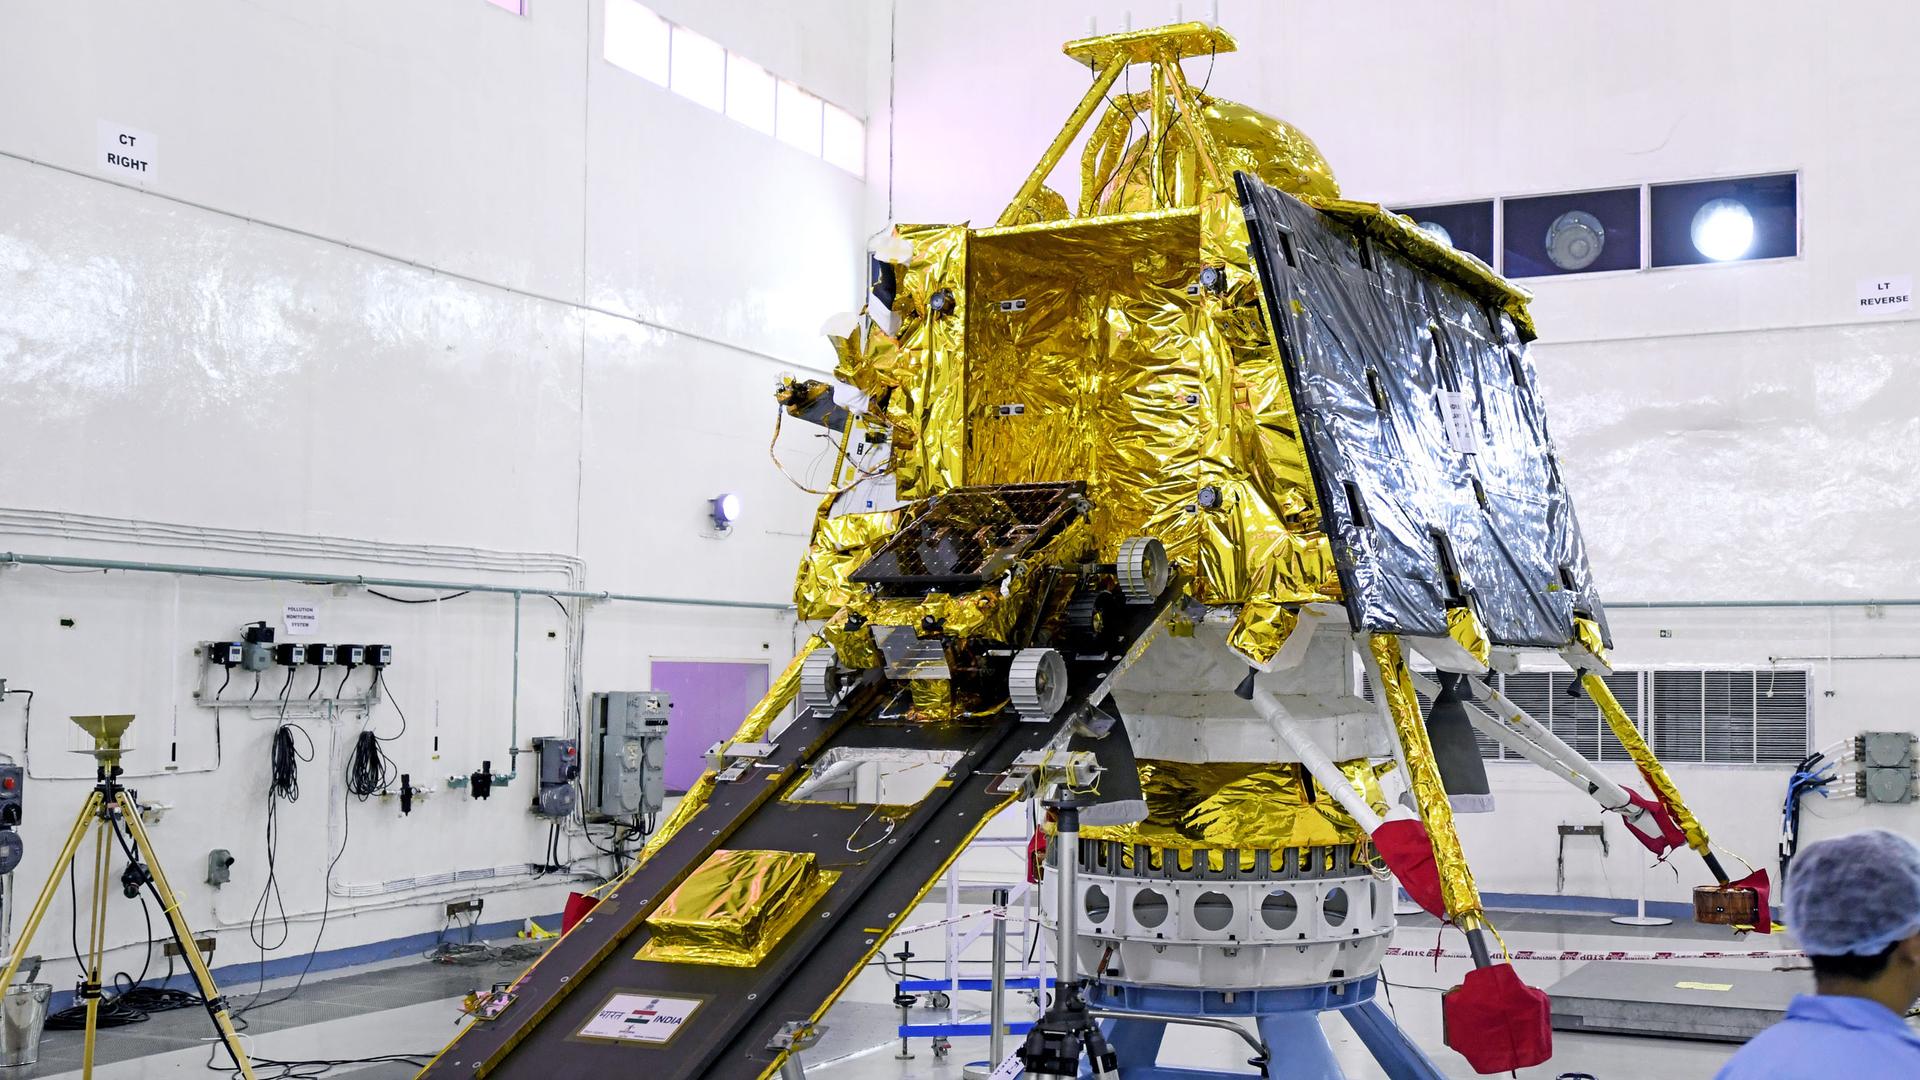 A small rover exits a large, gold spacecraft.